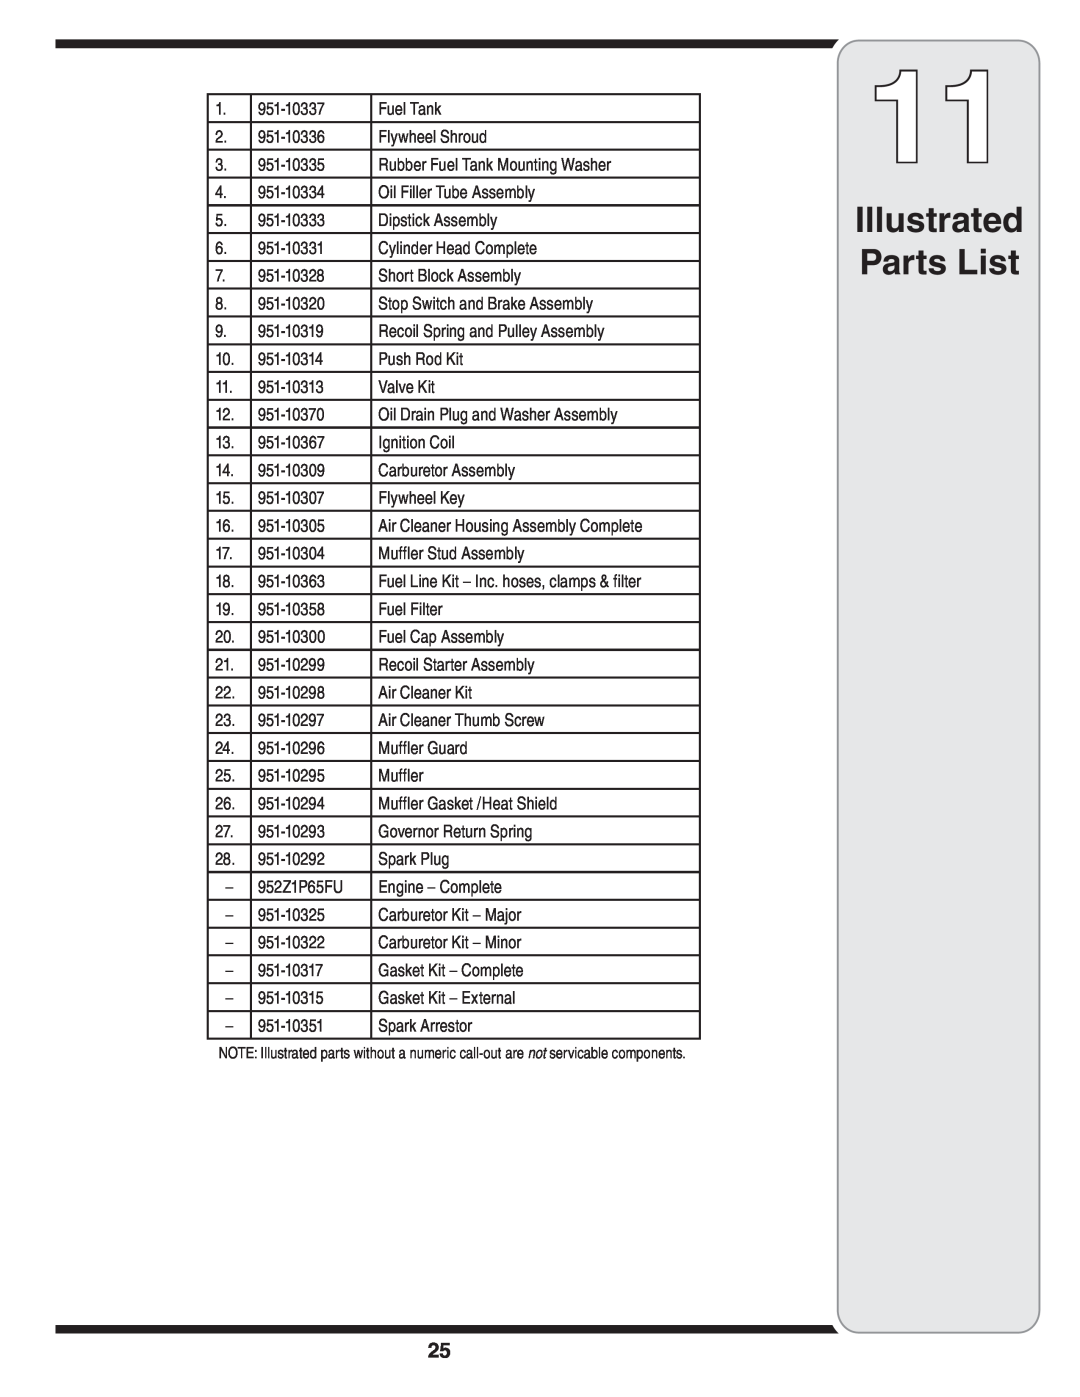 White Outdoor 54M manual Illustrated Parts List 